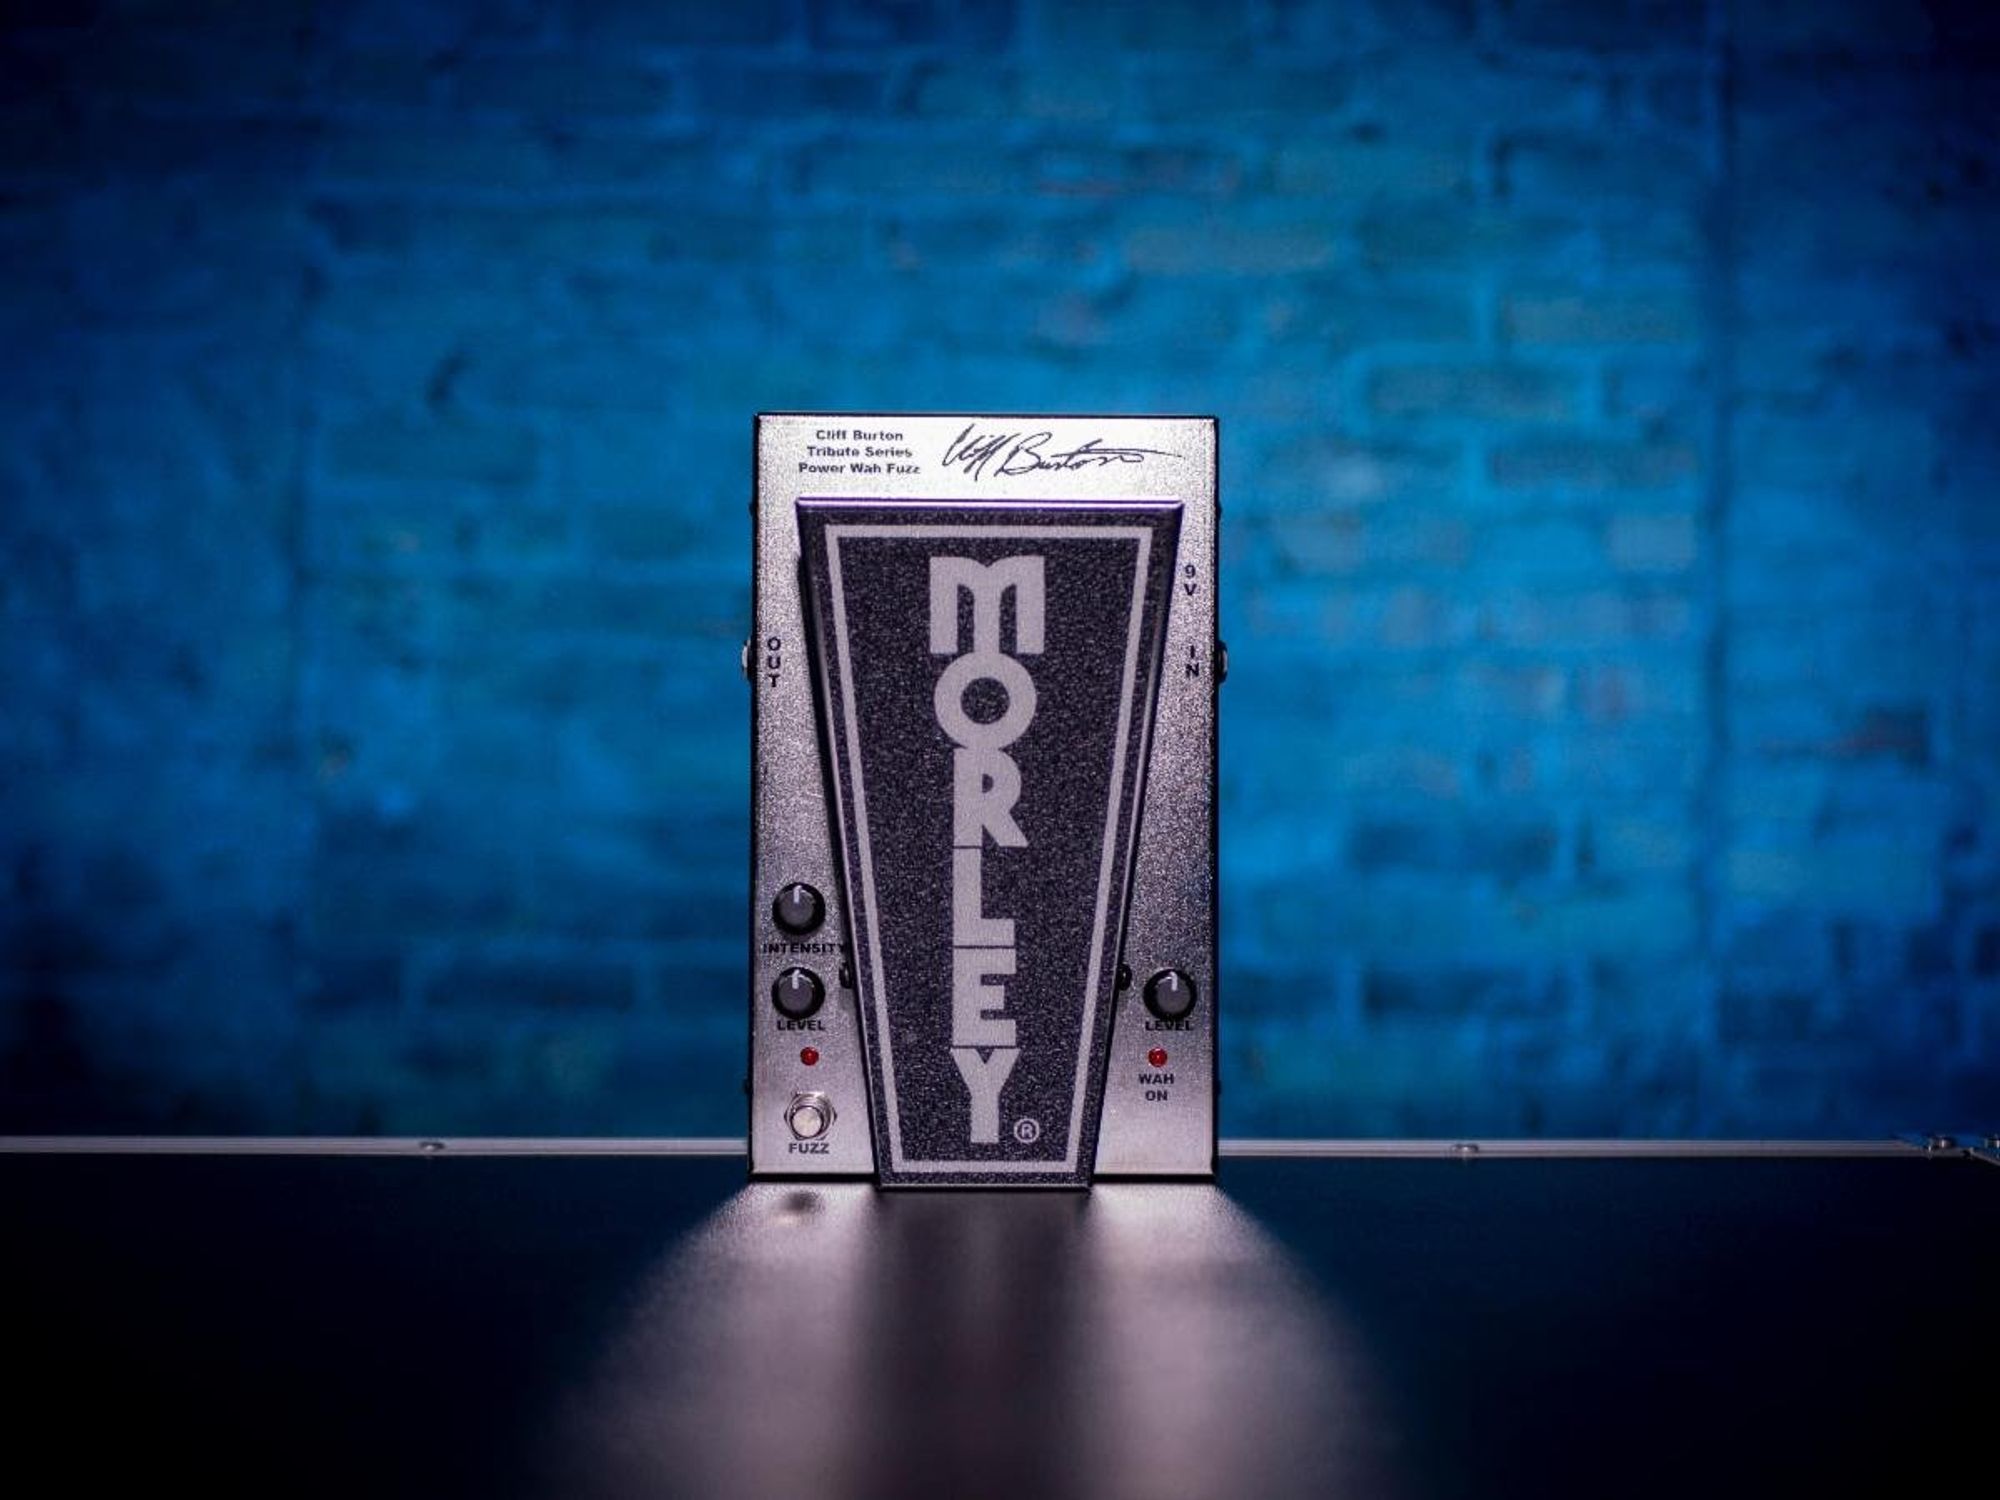 Morley Reissues Classic Power Wah Fuzz Pedal With Modern Improvements